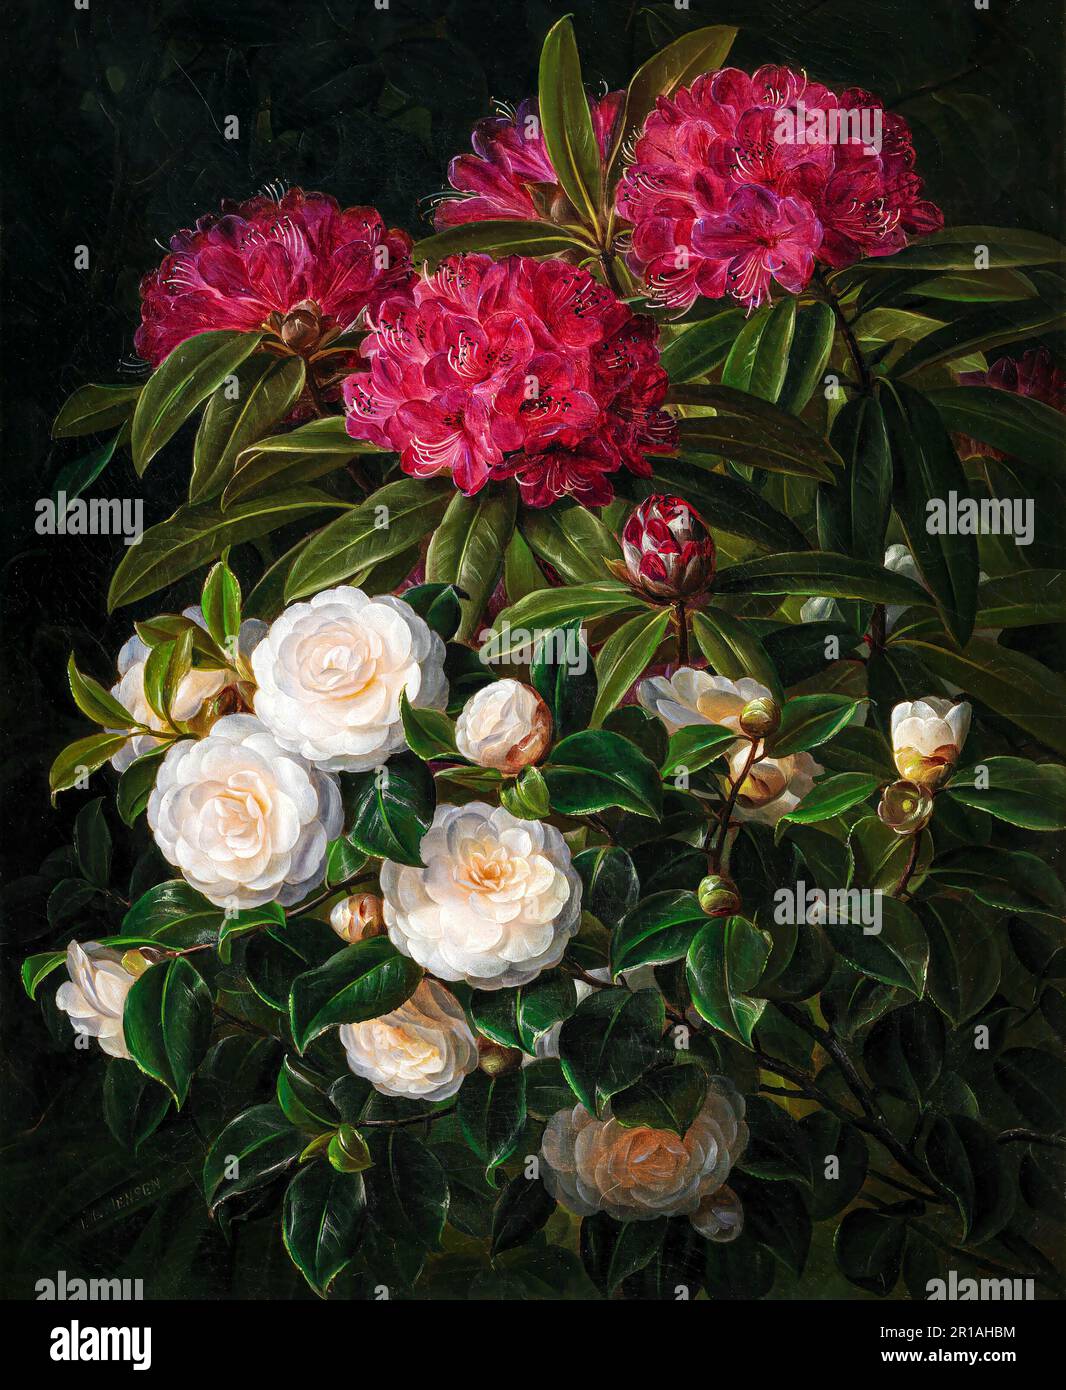 Camellias and rhododendrons Stock Photo